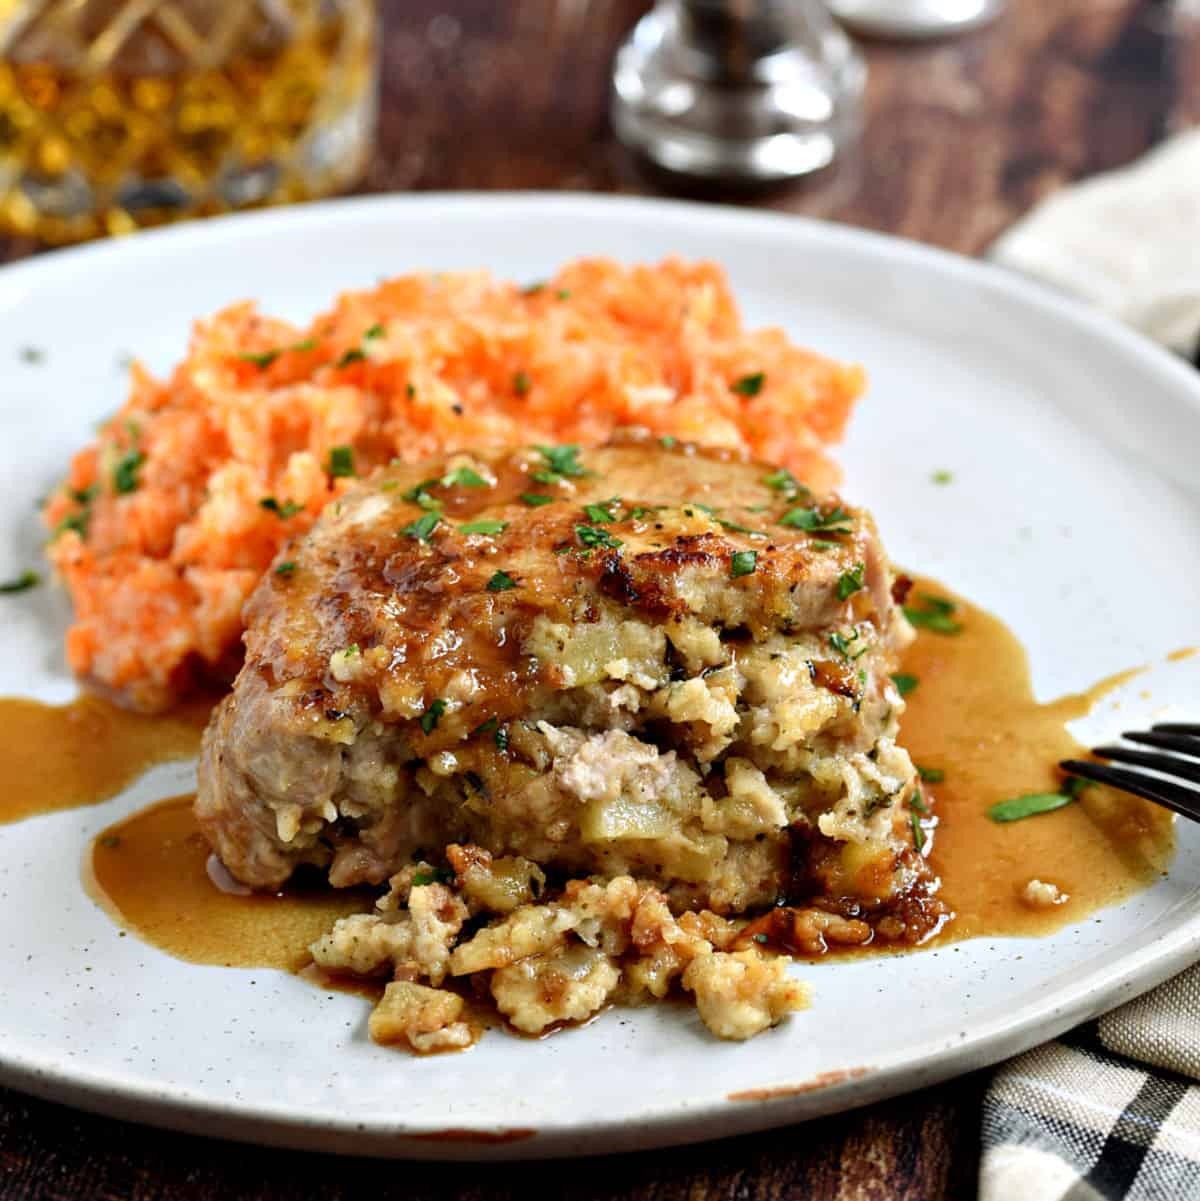 A stuffed pork chop covered in an apple-bourbon sauce and served with carrot parsnip mash on a large white plate with a glass of whisky in the background.